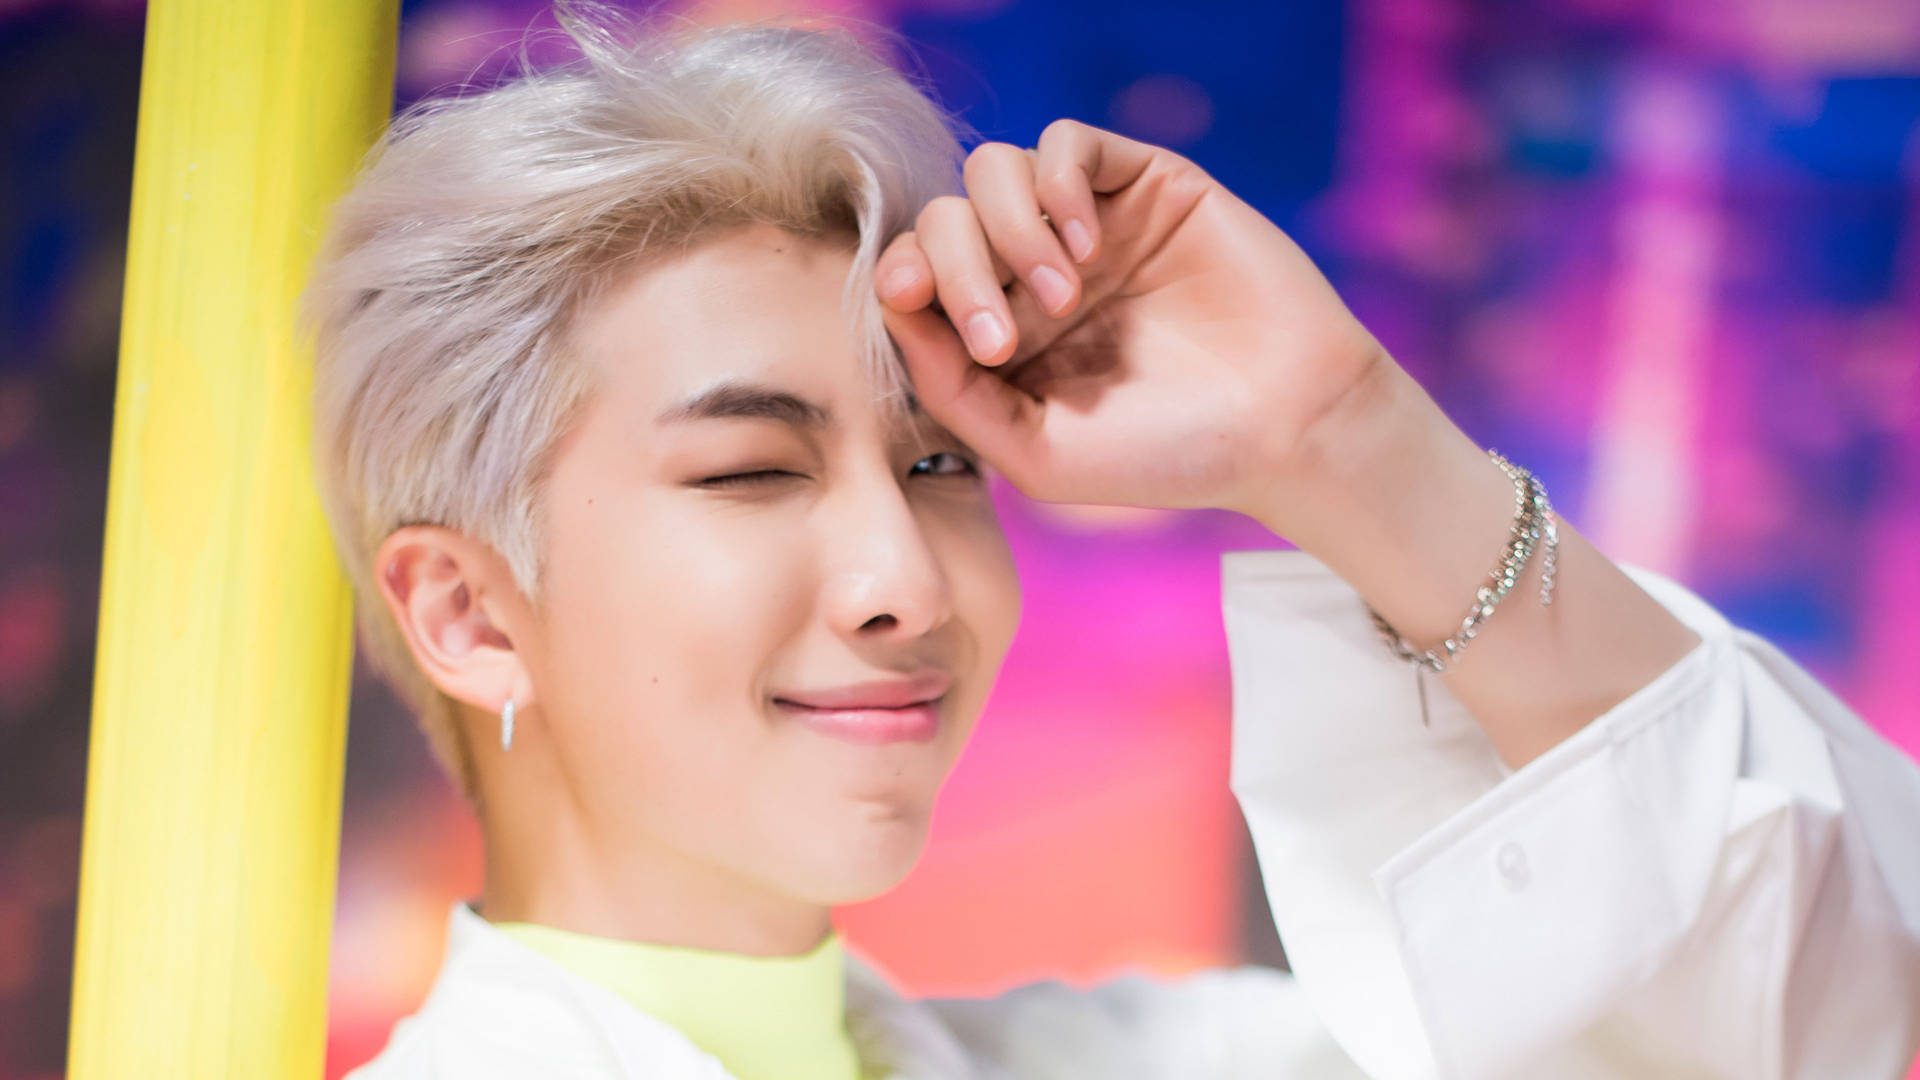 Rm Bts Boy With Luv Song Background